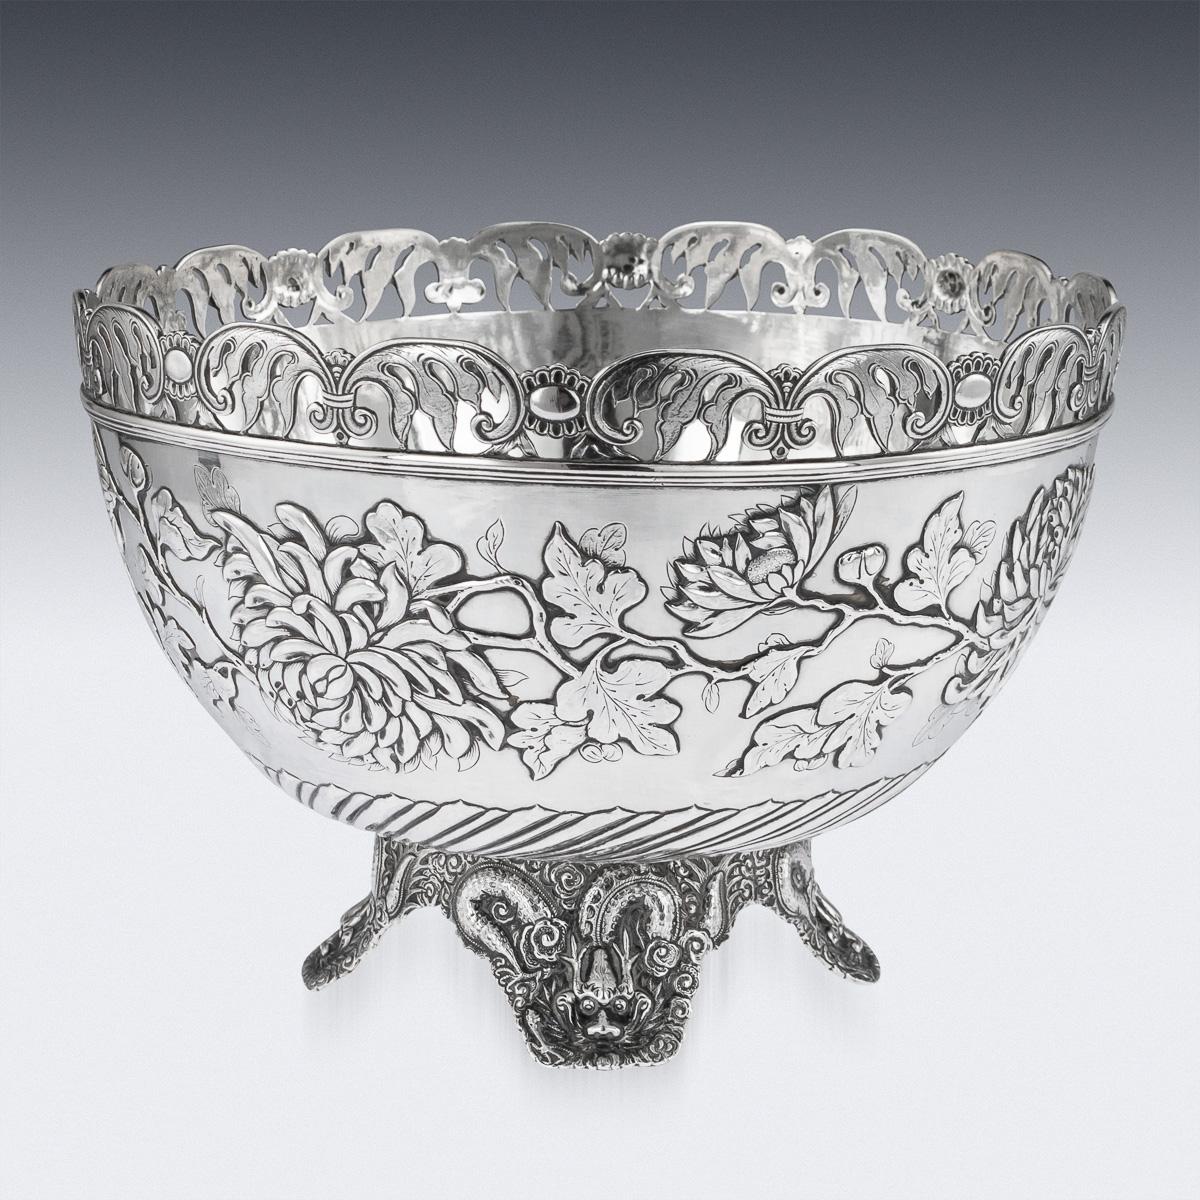 19th Century Chinese Export Solid Silver Bowl, Wing Cheong, Hong Kong c.1890 For Sale 1